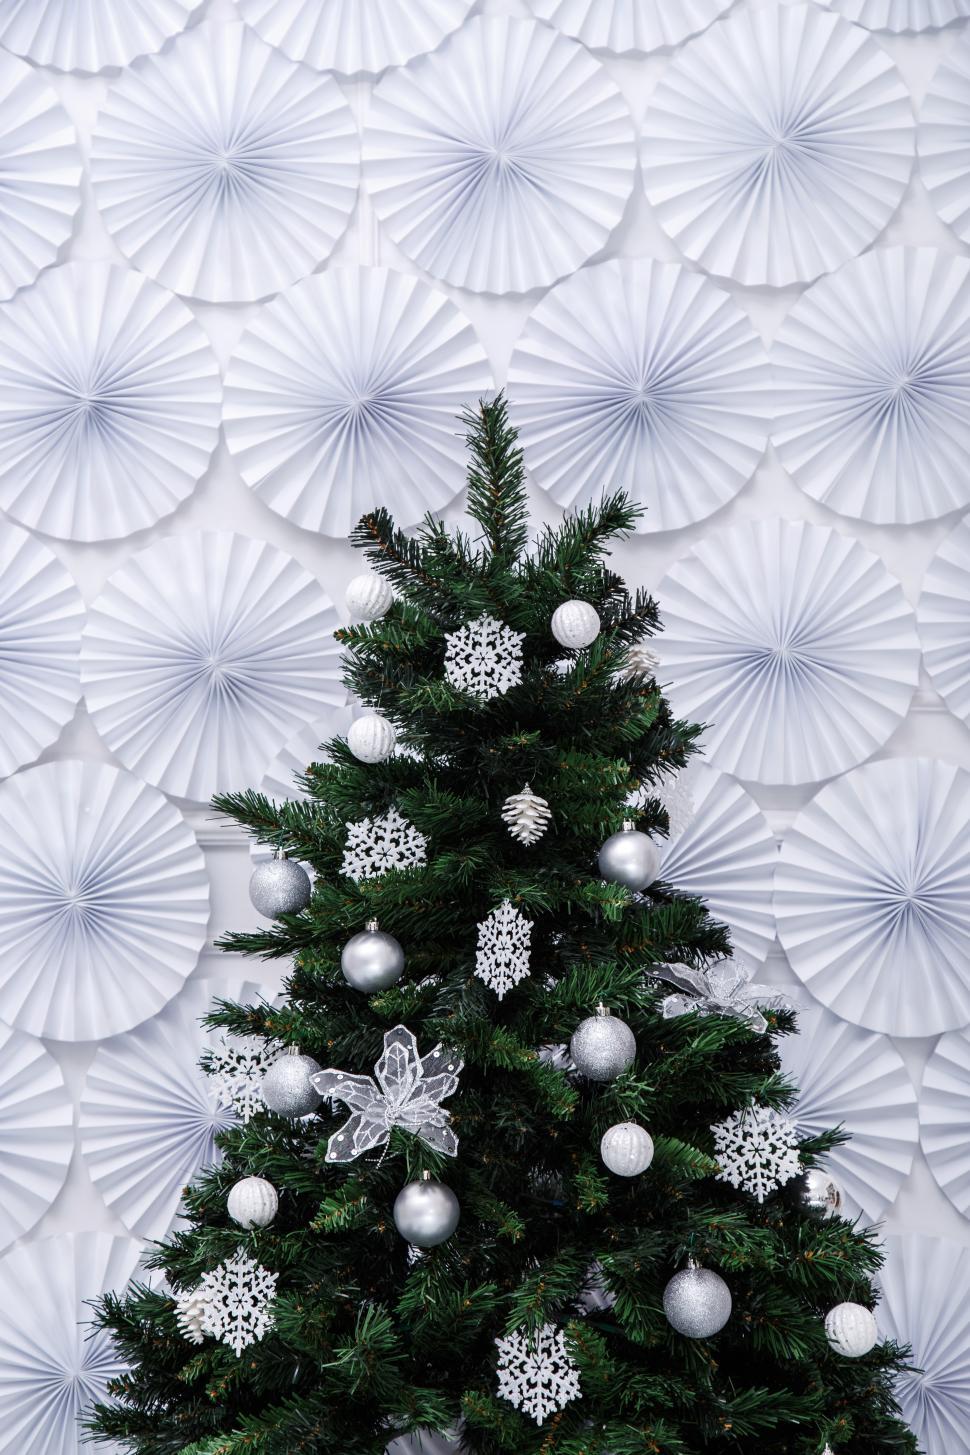 Free Image of Christmas tree on paper circle background 